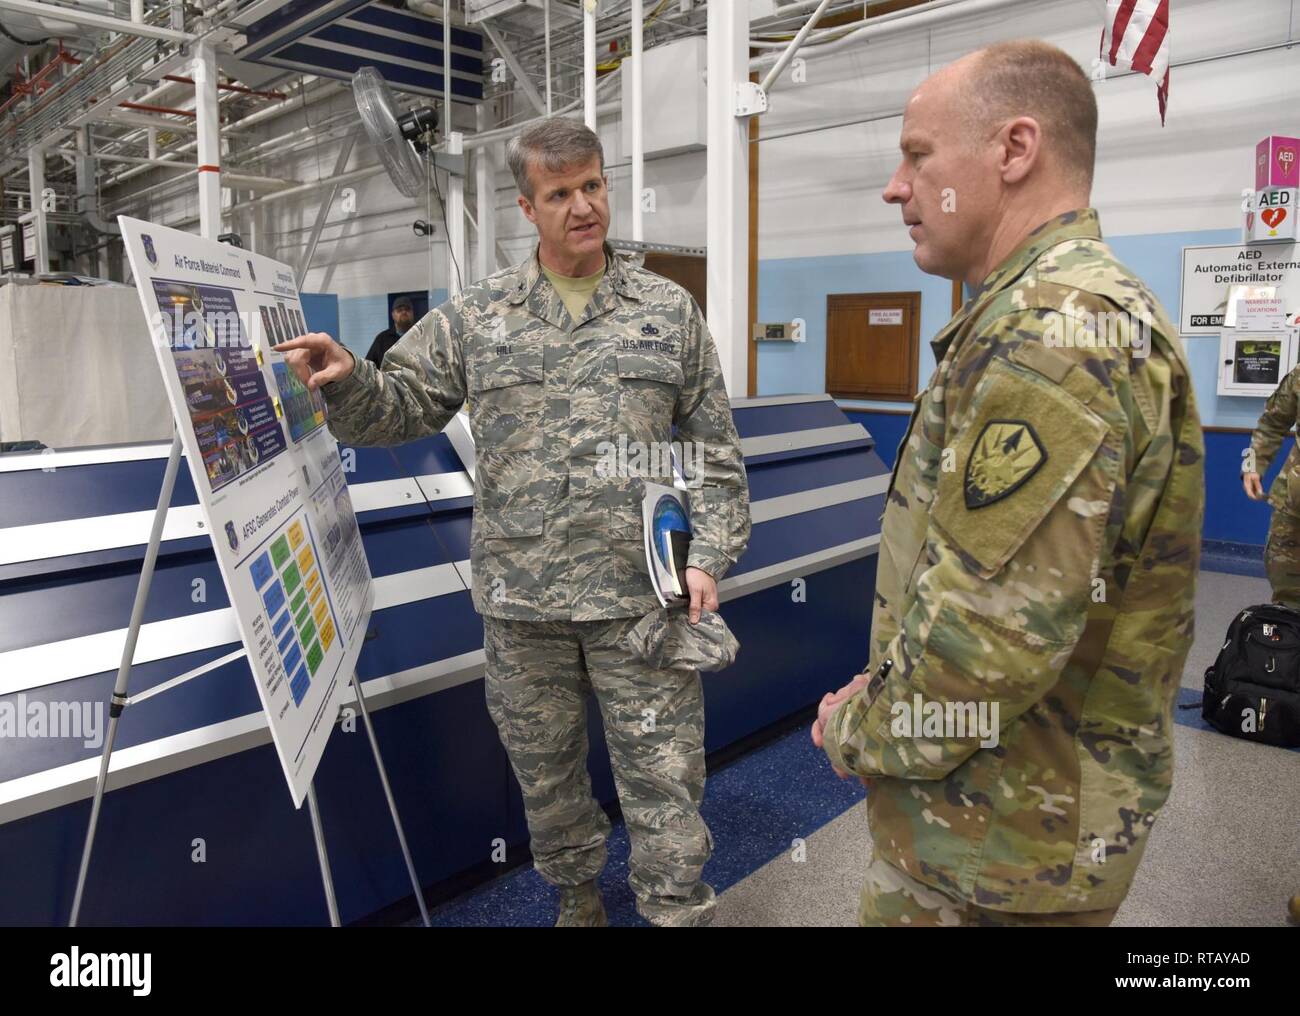 Brig. Gen. Chris Hill, Oklahoma City Air Logistics Complex commander briefs Gen. Stephen Lyons, United States Transportation Command commander, on the internal structure of the Air Force Sustainment Center and the OC-ALC mission. Gen. Lyons toured several locations around Tinker Air Force Base Feb. 4. Lyons was briefed on the programmed depot maintenance of the KC-135 and modifications in progress, the REACT lab and the KC-46A depot activation timeline and critical path, including partnering initiatives, Milcon and the KC-46 Sustainment Campus. Stock Photo